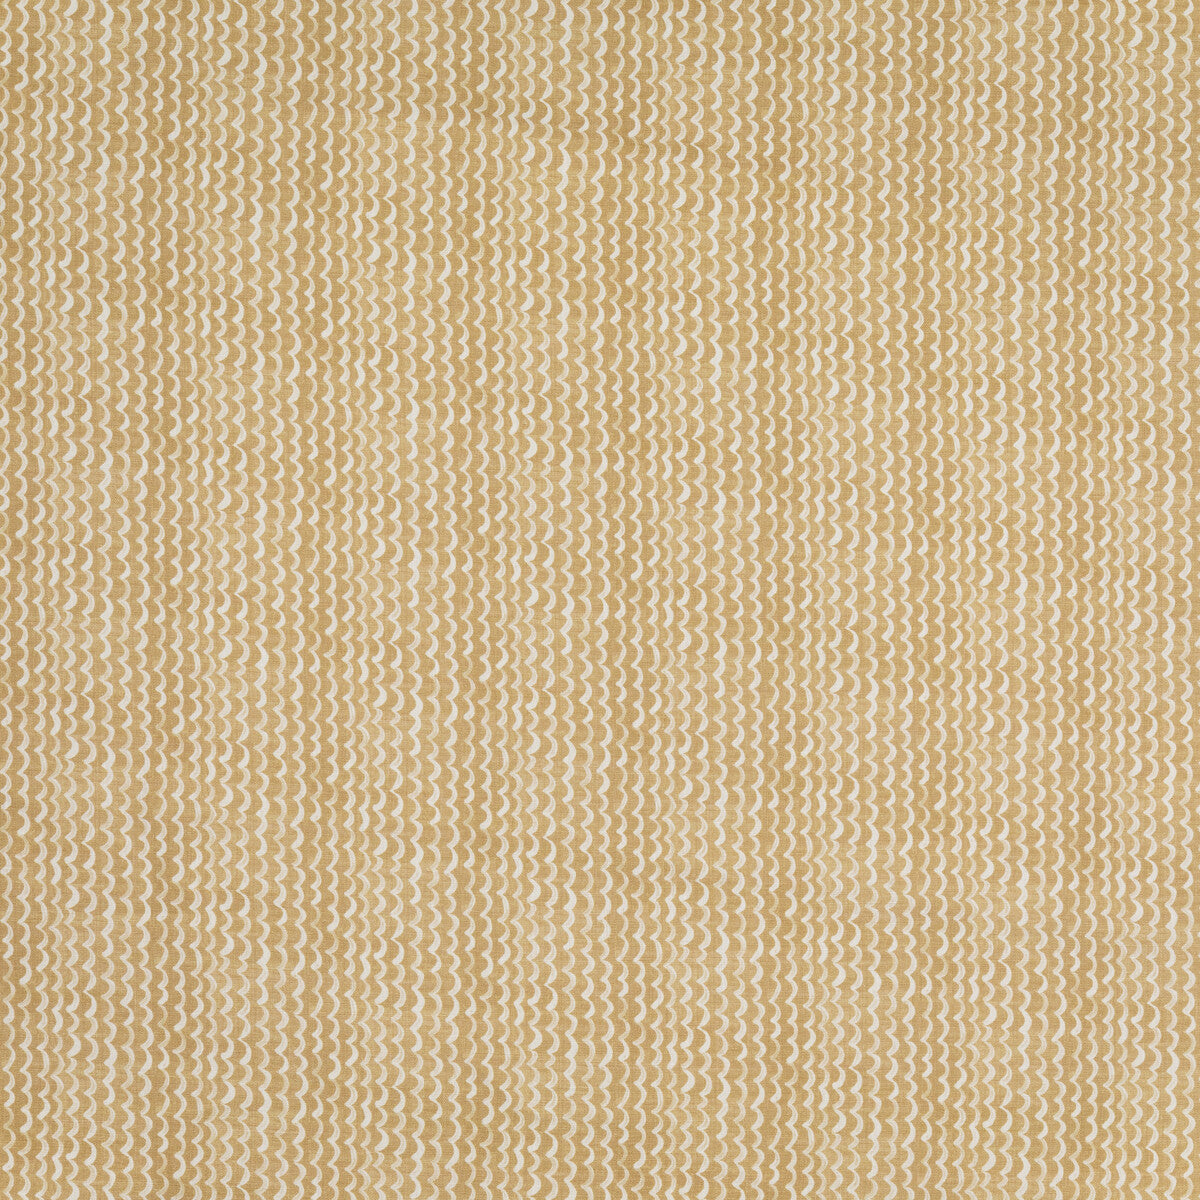 Camden fabric in gold color - pattern BFC-3704.4.0 - by Lee Jofa in the Blithfield Eden collection